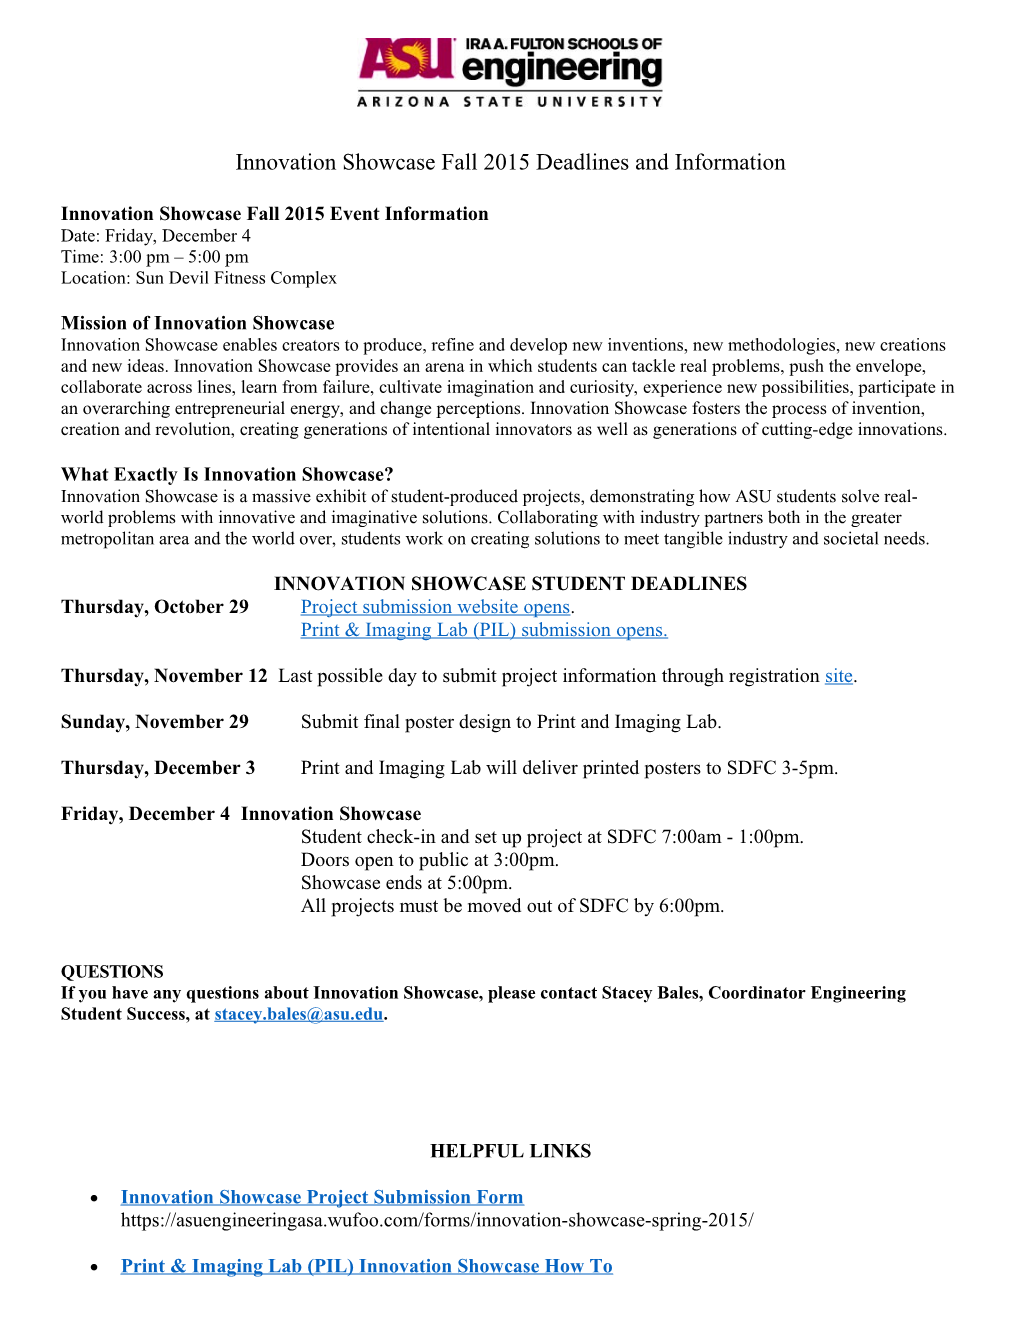 Innovation Showcase Fall 2015 Event Information